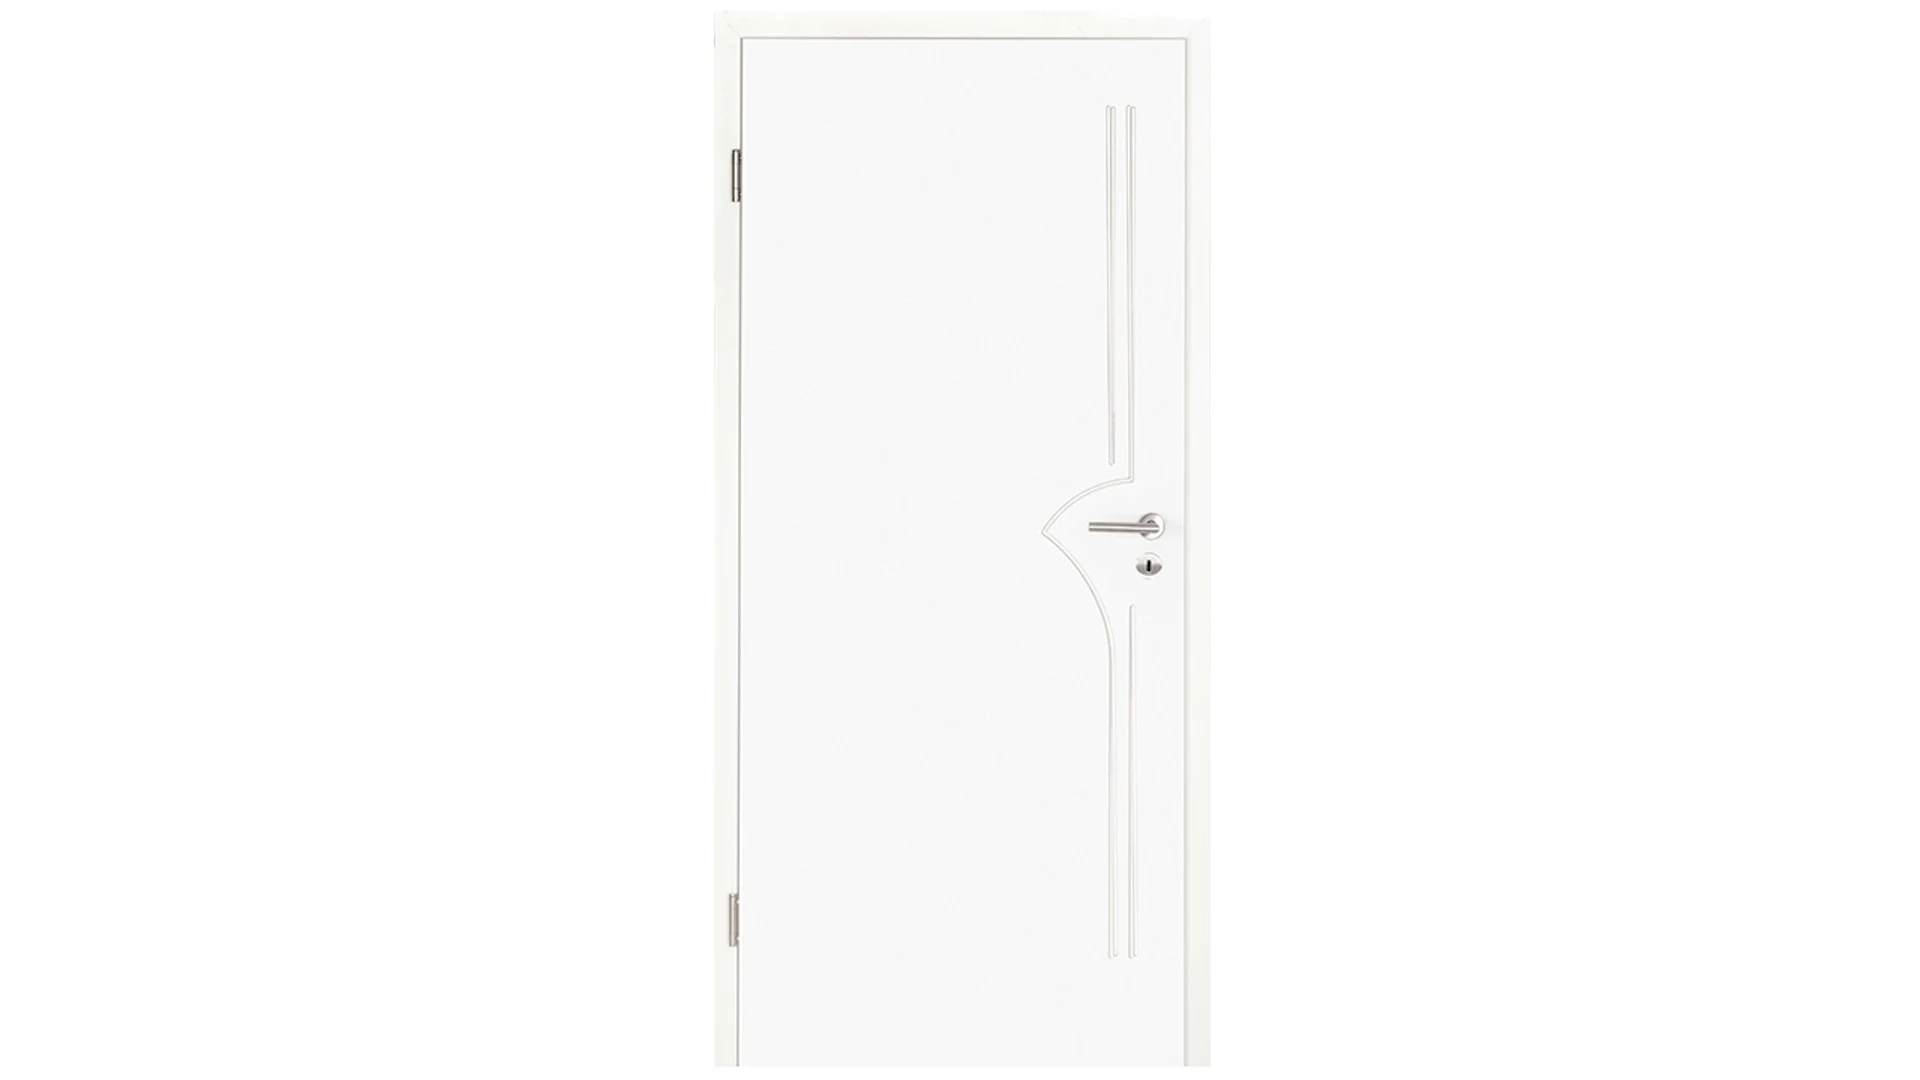 planeo interior door lacquer 2.0 - Kalle 9010 white lacquer 1985 x 985 mm DIN L - round RSP hinge 3-t